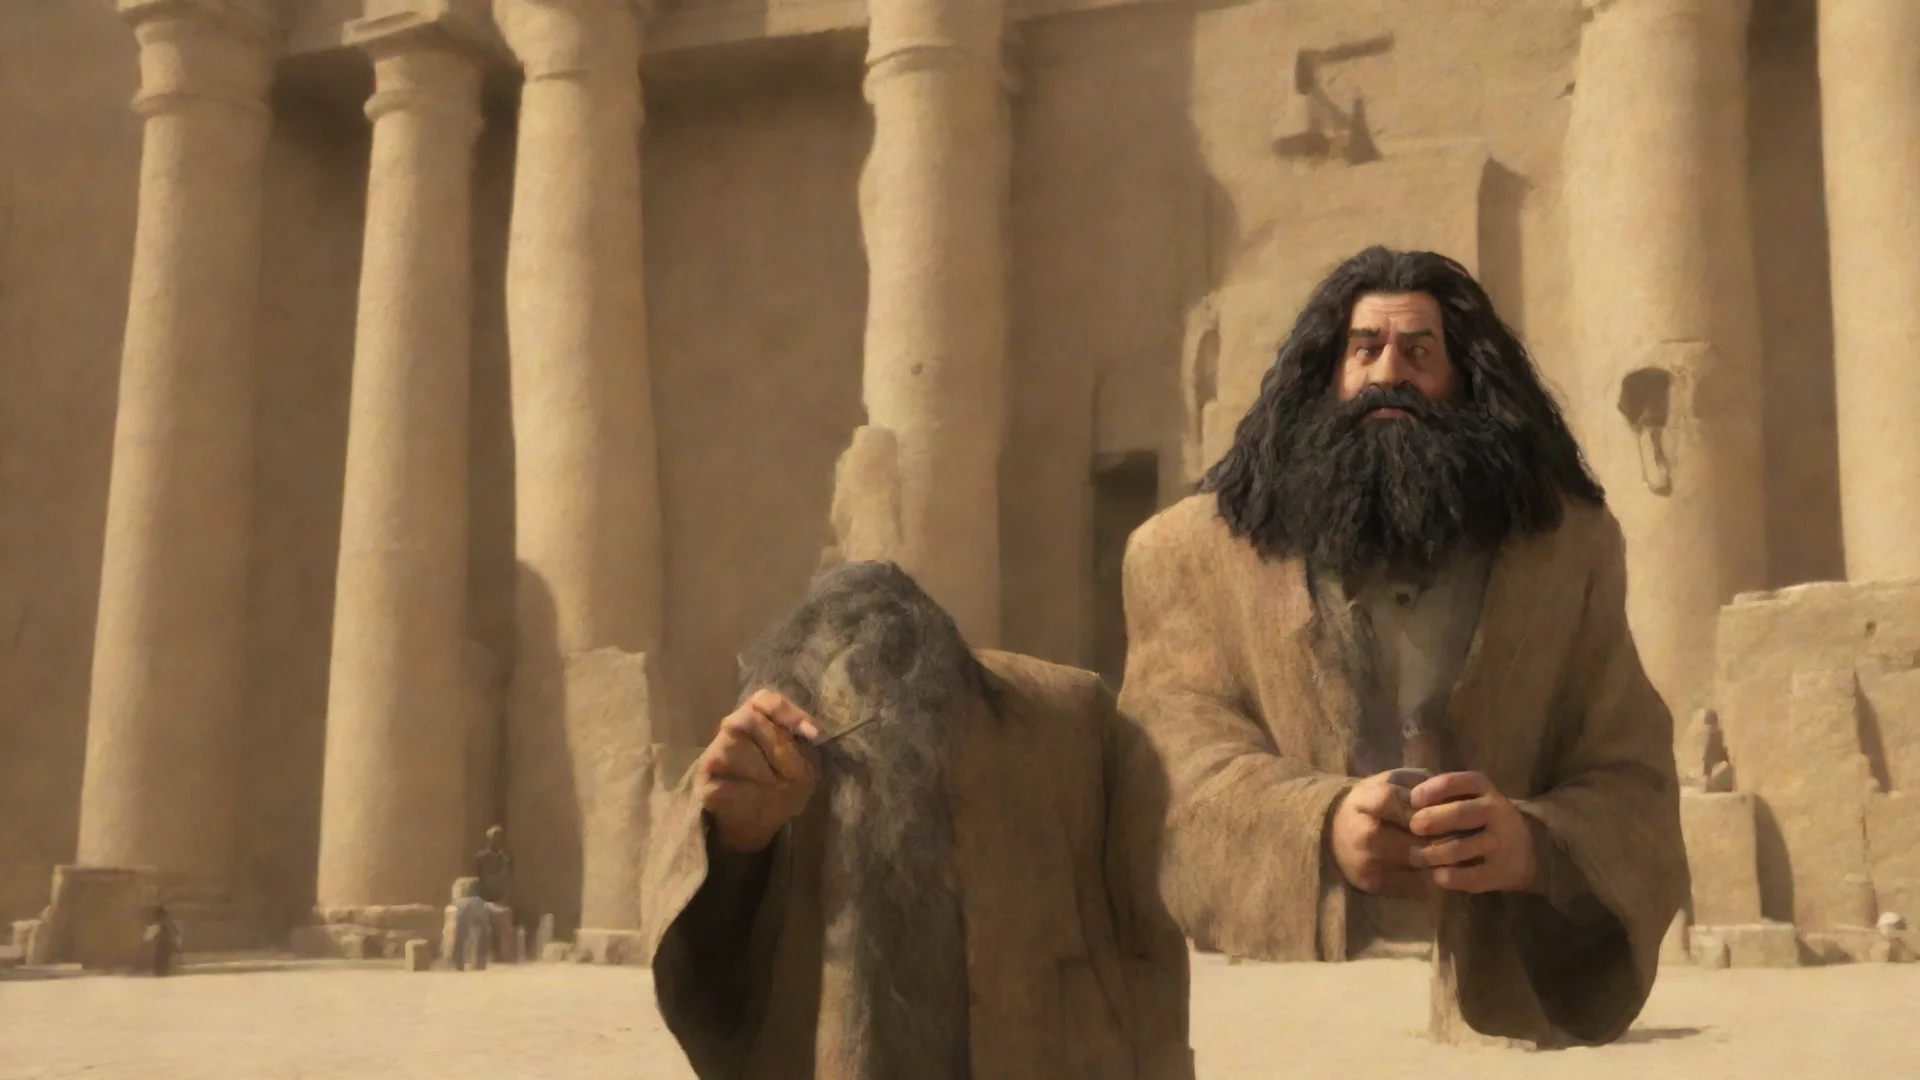 aiamazing ps1 hagrid in egypt awesome portrait 2 wide